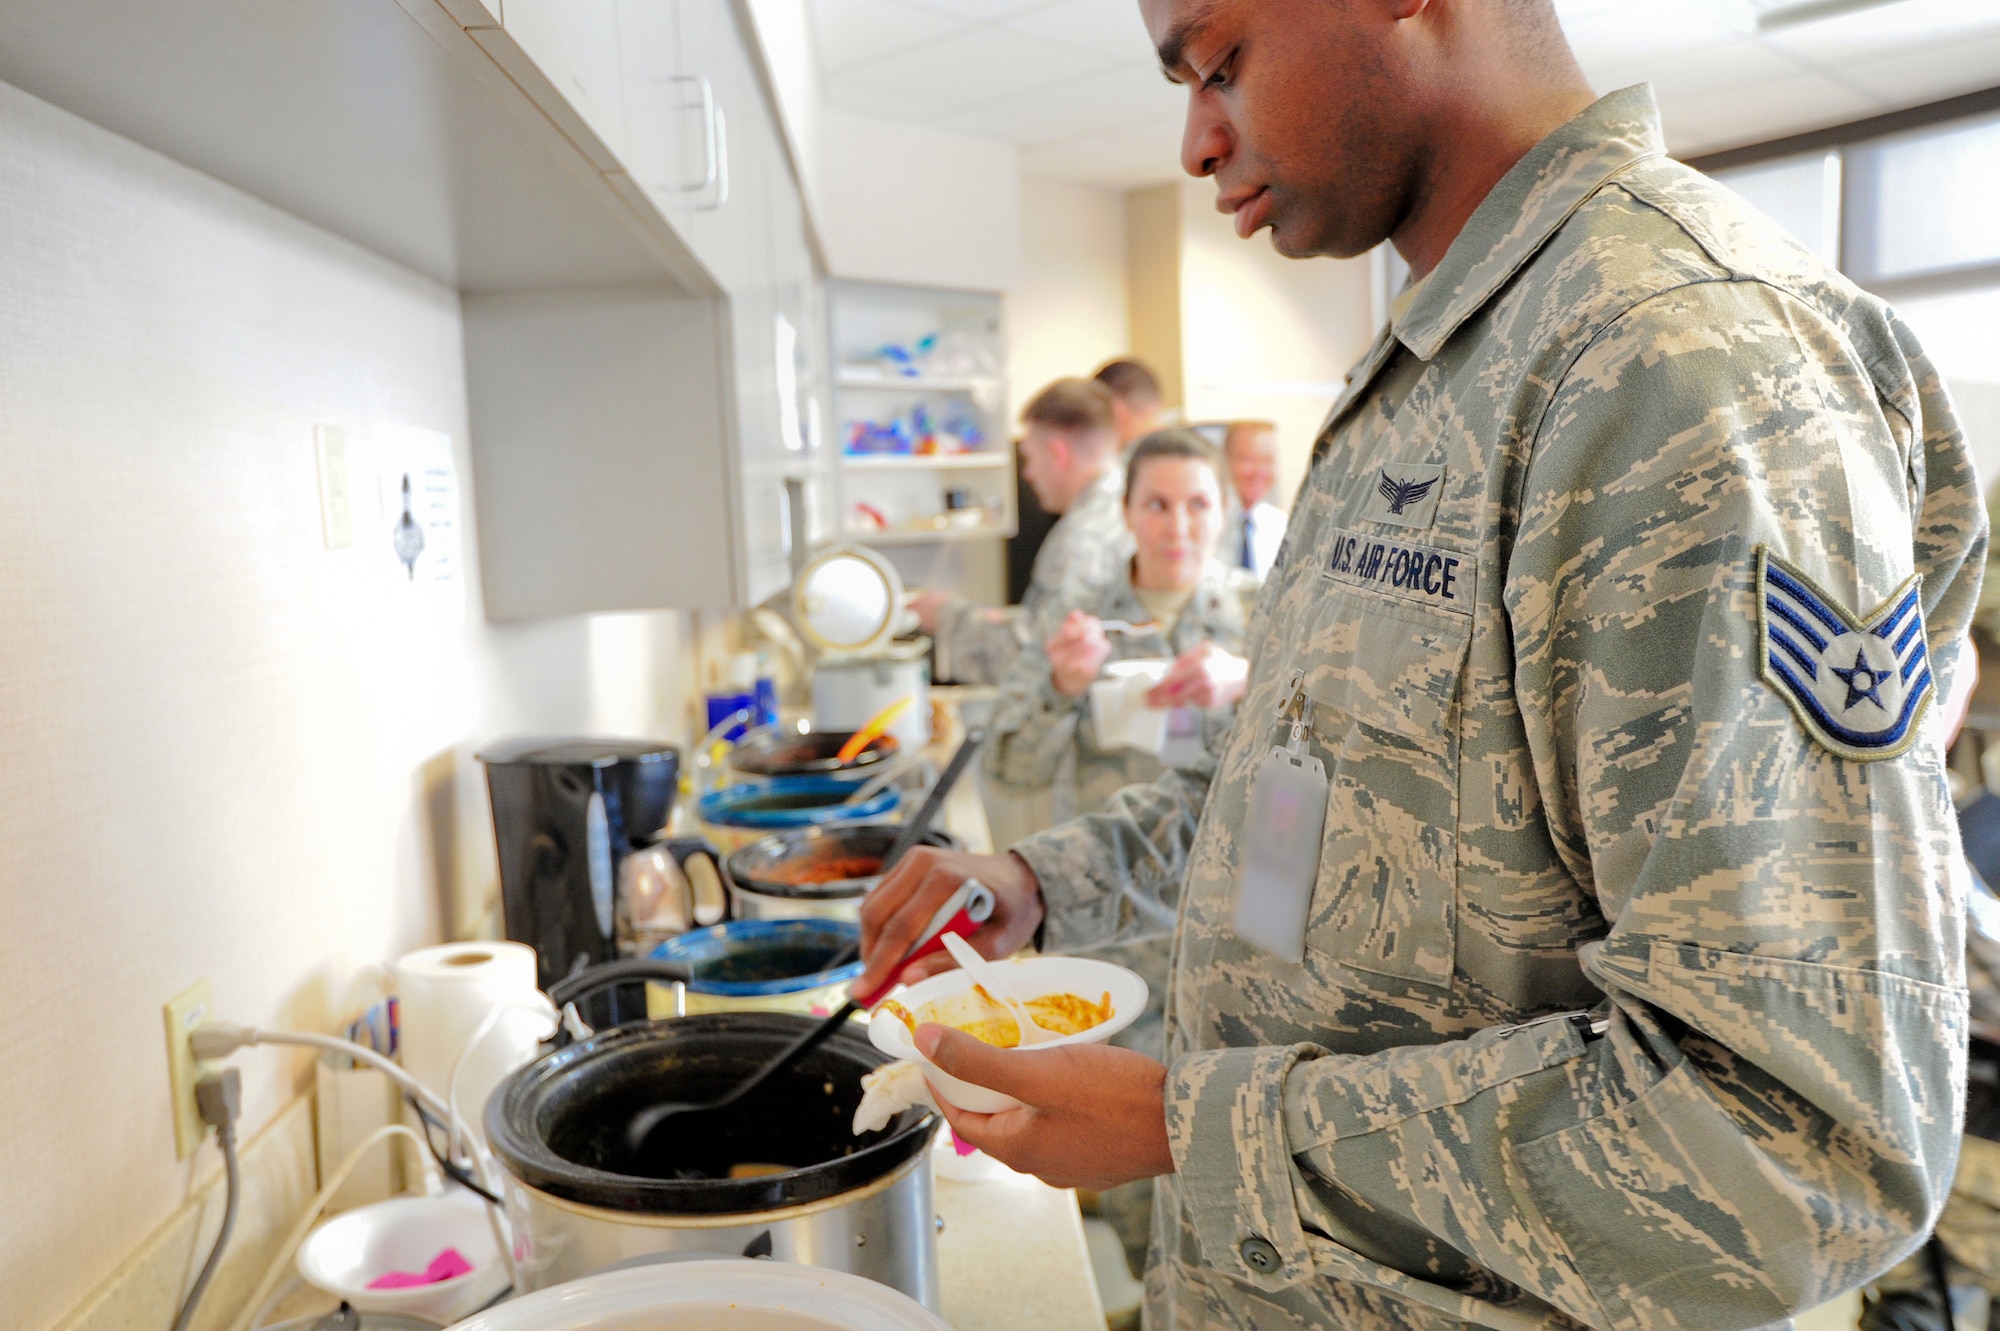 Air Force Reserve Staff Sgt. Matthew Cleveland tries another chili sample Feb. 1, 2014, at Schriever Air Force Base, Colo. For Cleveland and others, it was one of 12 different chilis and soups to taste during the 310th Space Wing Top-3 chili and soup cook-off. The cook-off was held to raise money for the 310th SW annual awards banquet in March. The Top-3 is an association of senior non-commissioned officers that promote military professionalism, development and quality of life for all enlisted personnel. (U.S. Air Force photo/Tech. Sgt. Nicholas B. Ontiveros)